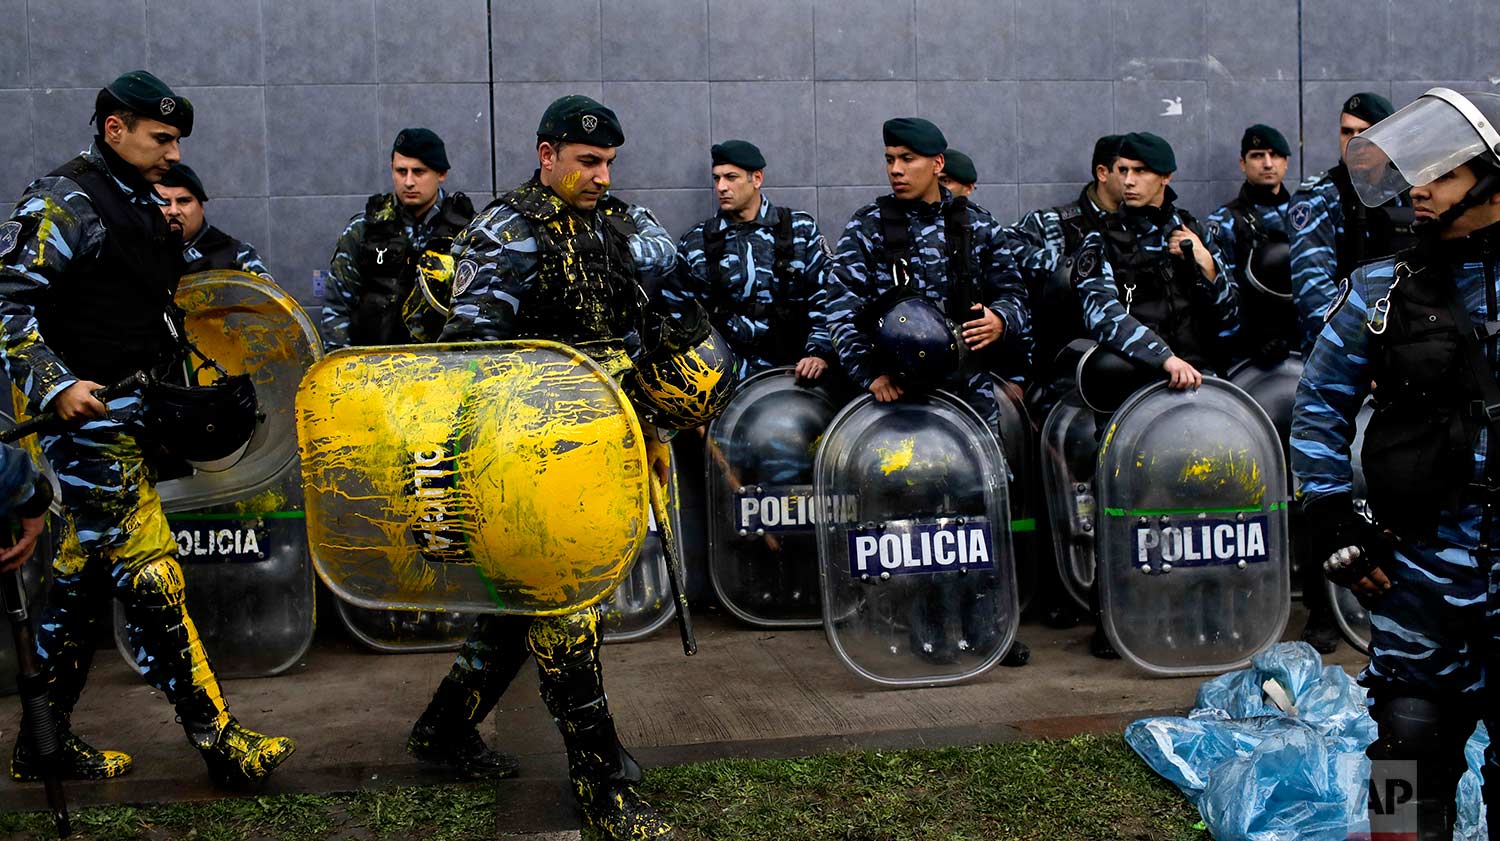 Police who were stained with yellow paint thrown by protesters, form outside the PepsiCo plant on the outskirts of Buenos Aires, Argentina, Thursday, July 13, 2017. Security forces clashed Thursday with former PepsiCo employees after resisting eviction from the plant. Workers had occupied the plant after PepsiCo closed the plant last month.(AP/Natacha Pisarenko)